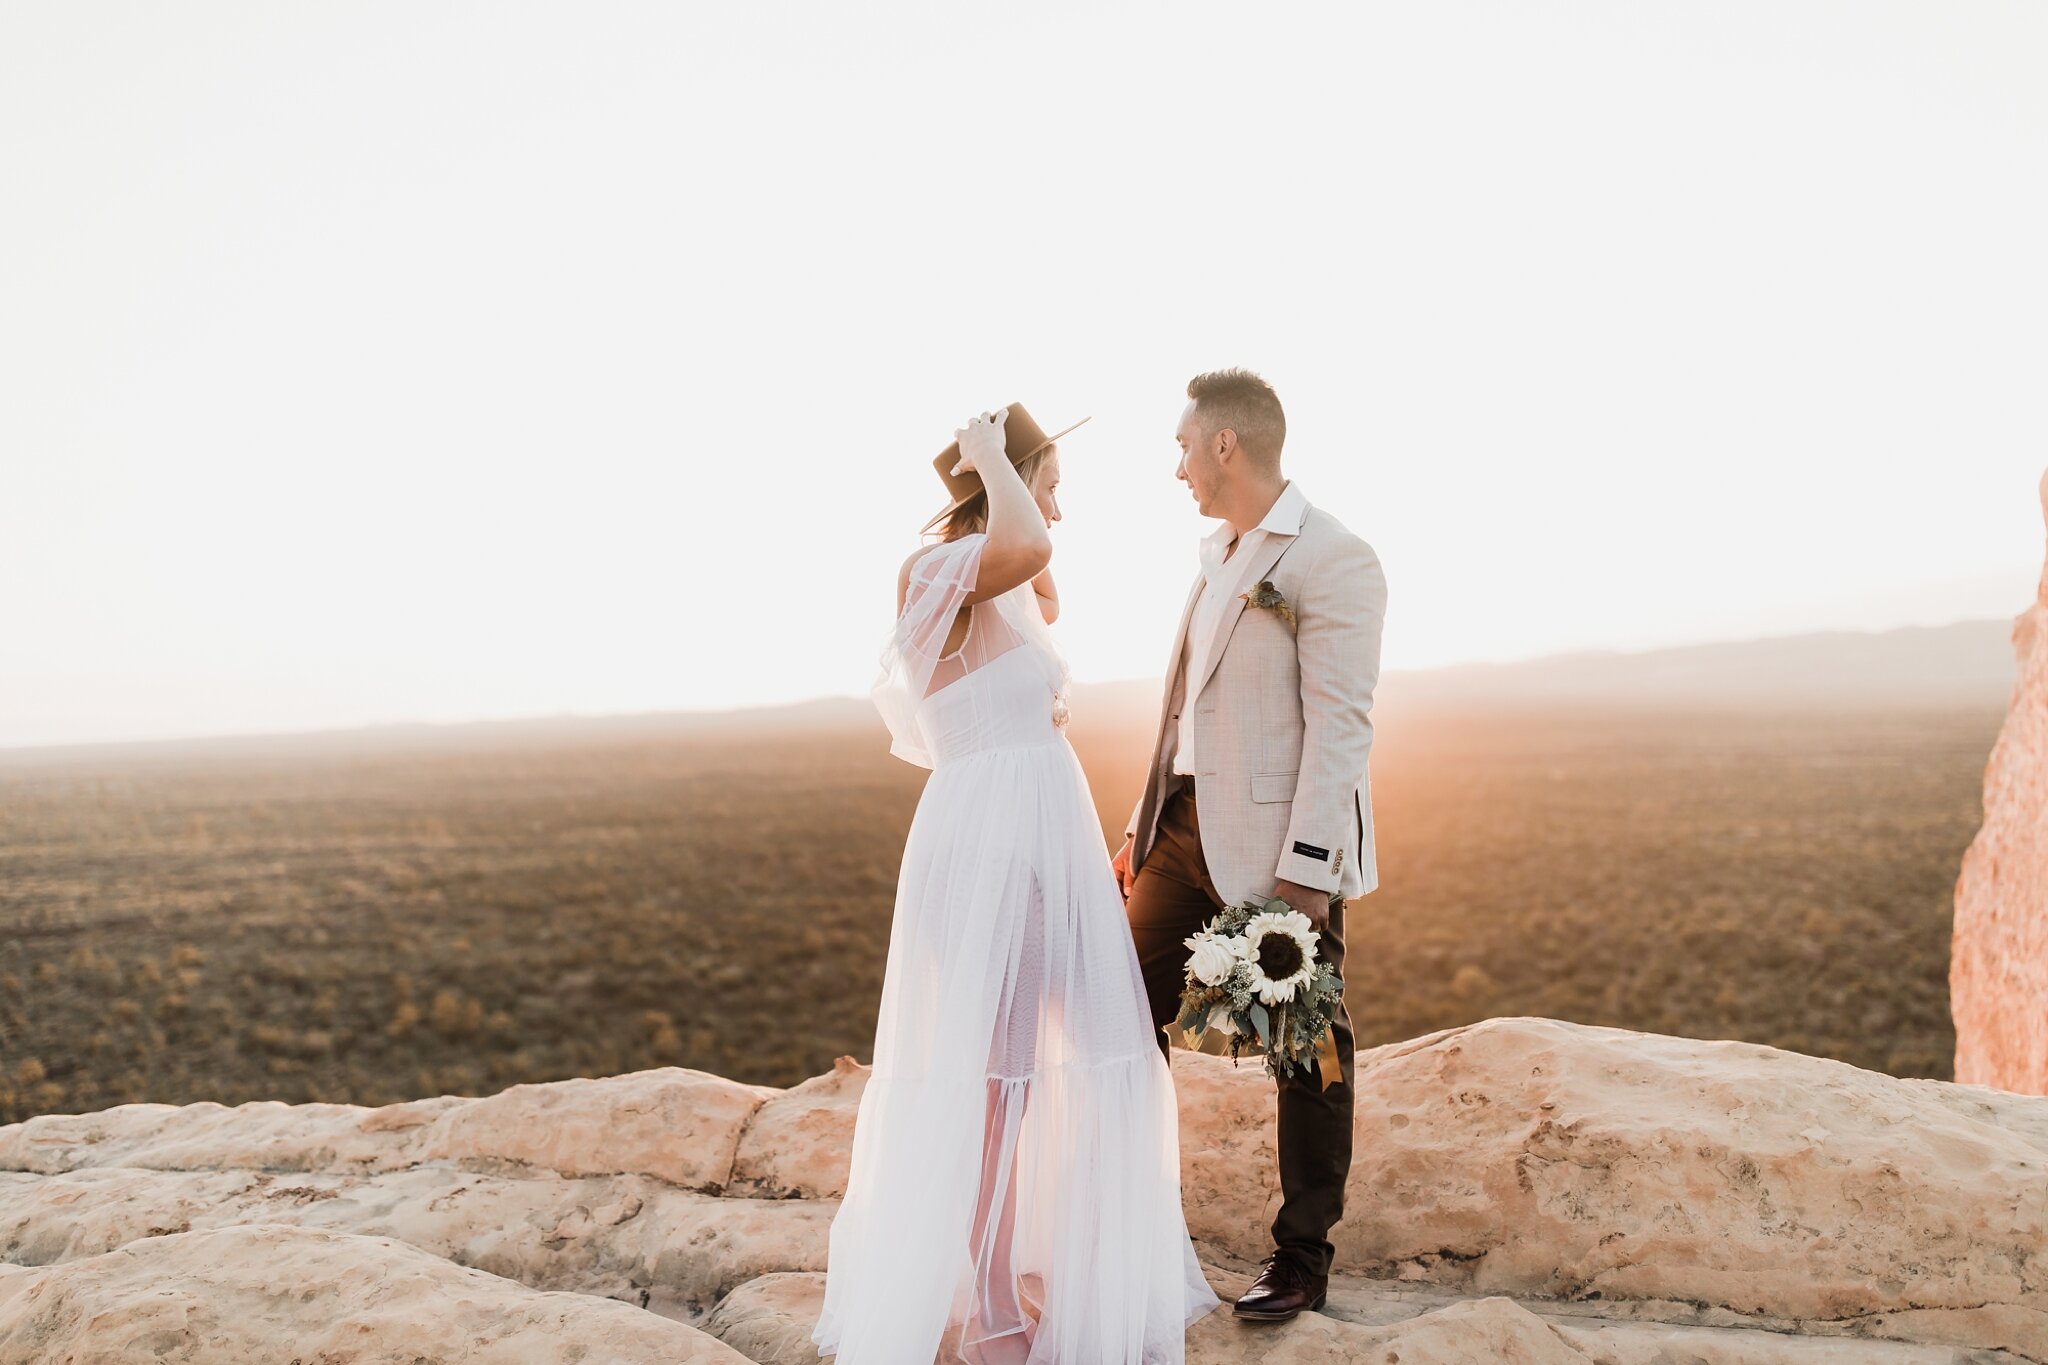 Alicia+lucia+photography+-+albuquerque+wedding+photographer+-+santa+fe+wedding+photography+-+new+mexico+wedding+photographer+-+new+mexico+wedding+-+anniversary+-+styled+anniversary+-+elopement+-+styled+elopement_0035.jpg